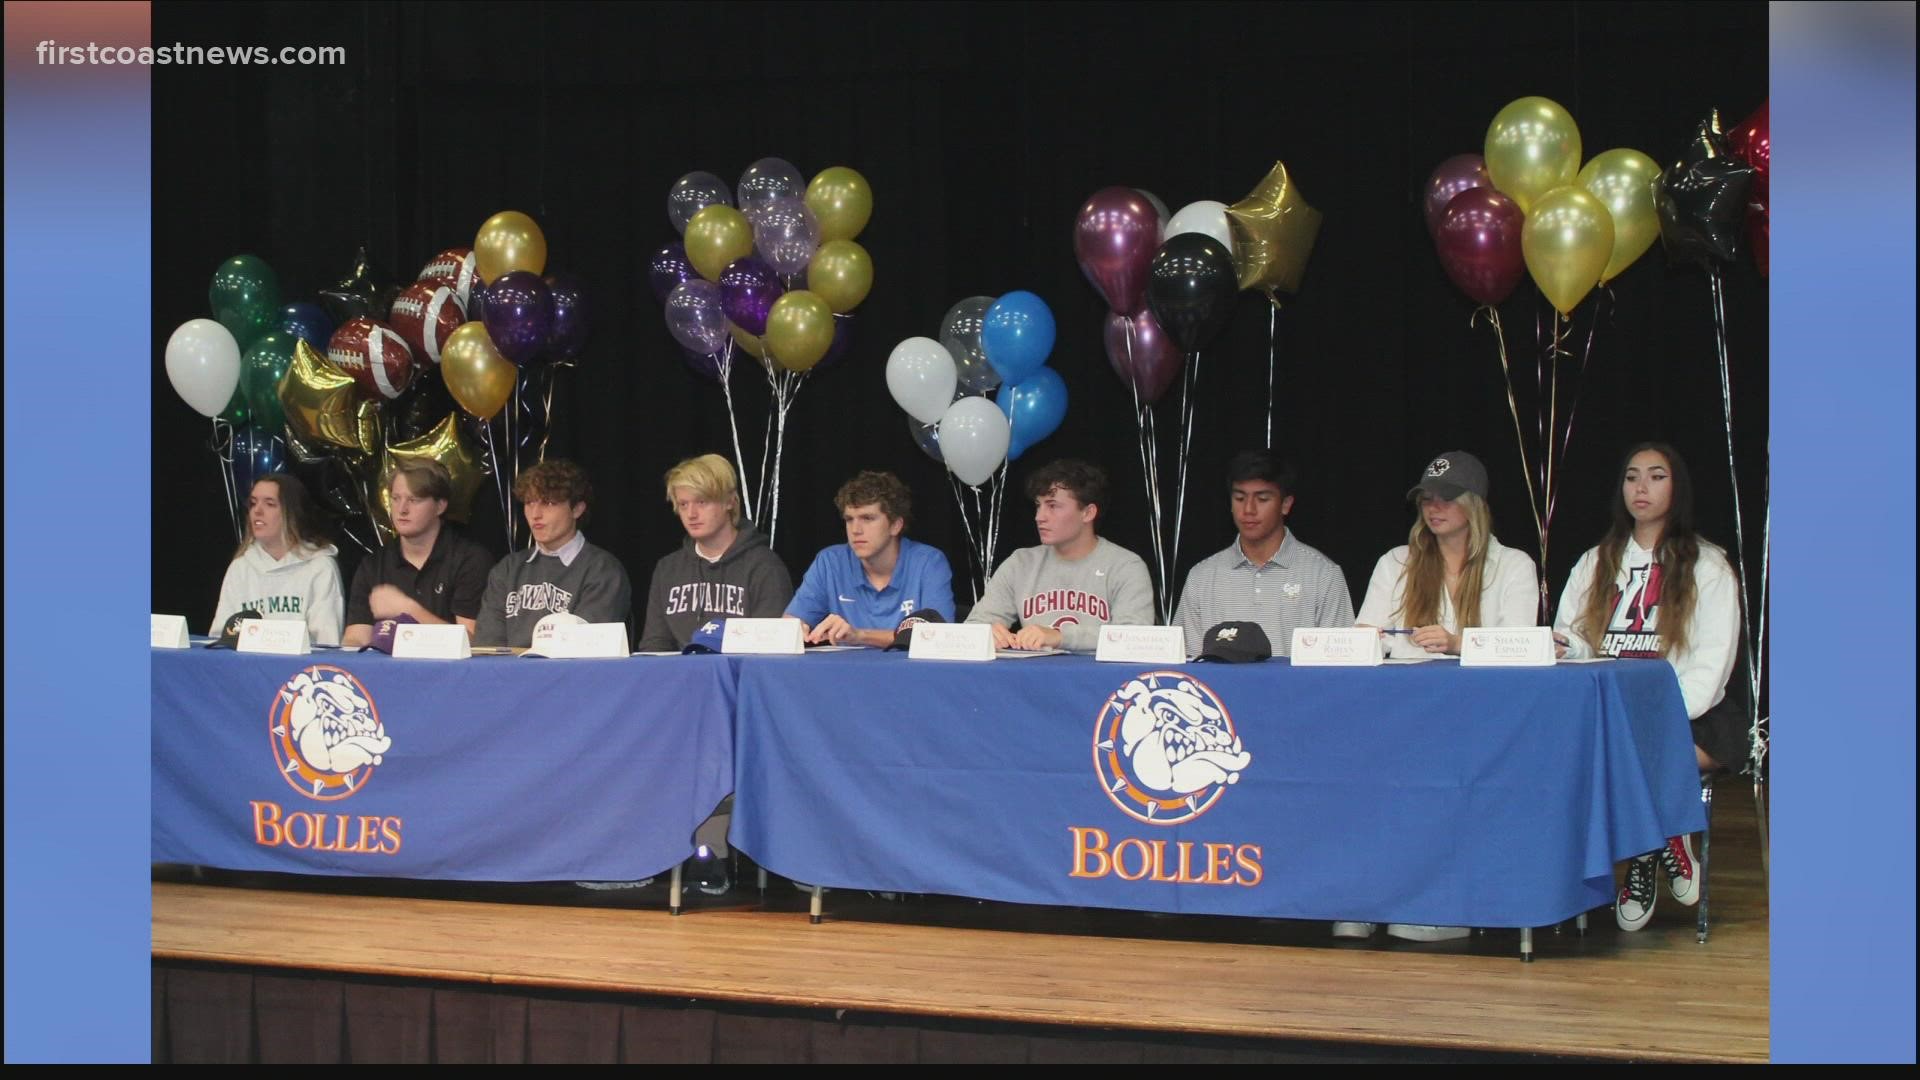 Bolles has had 51 college athletic commitments this year, including Wednesday's nine additions.